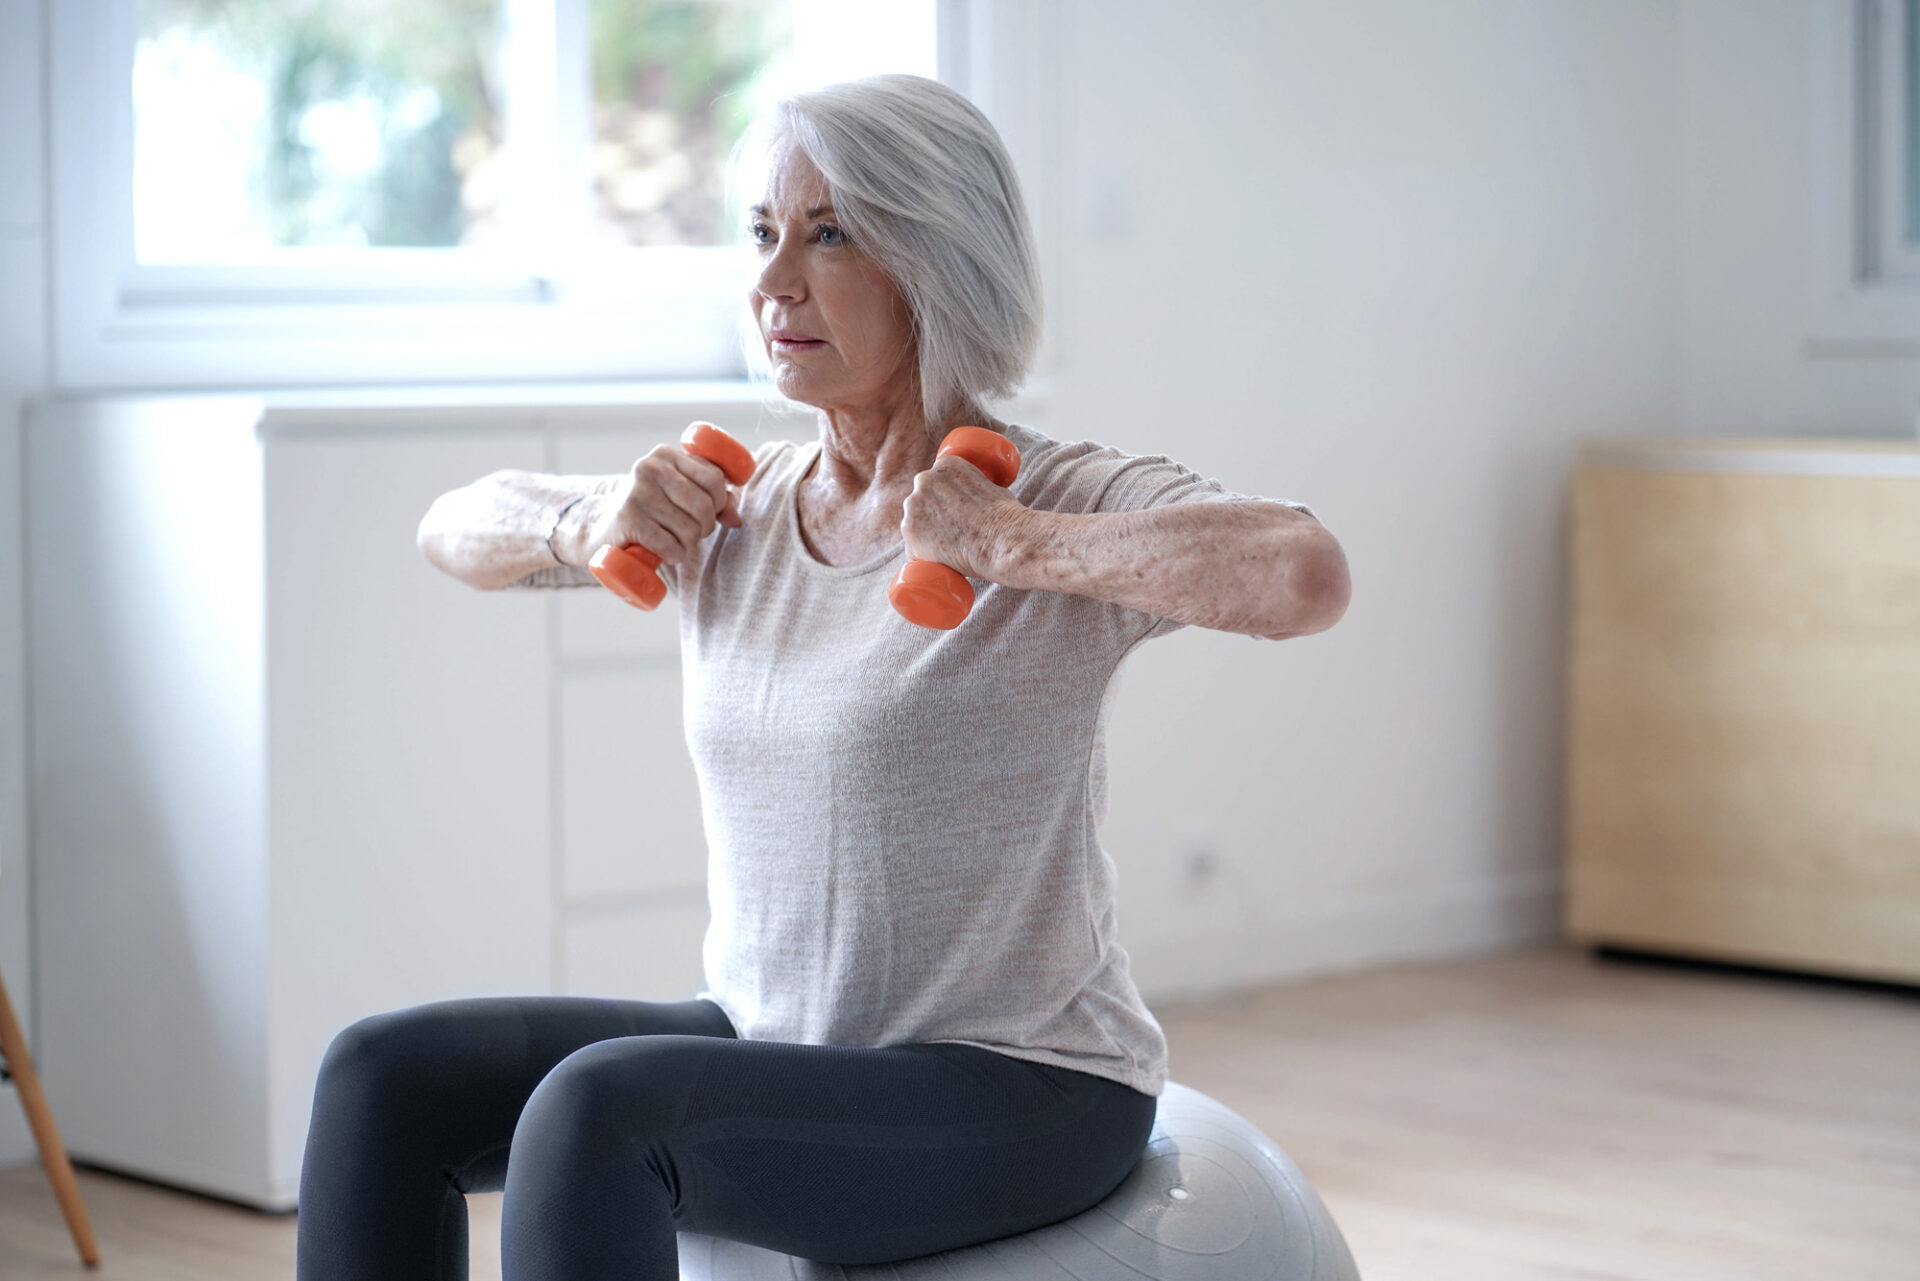 An older woman sitting on an exercise ball and lifting 2 dumbbells.